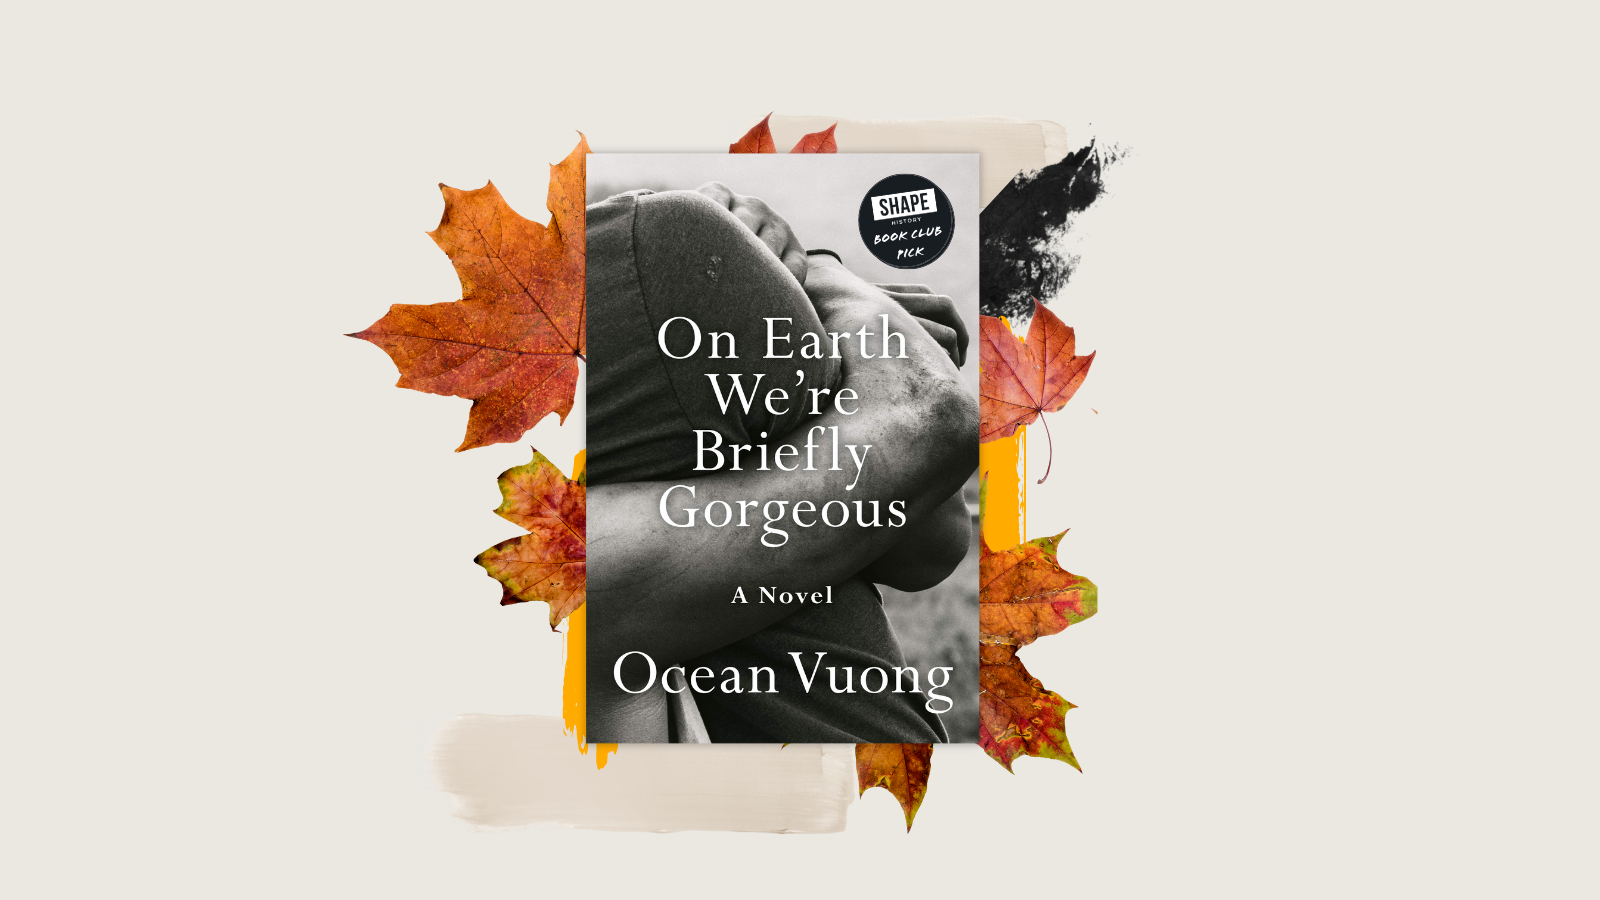 Book review: On Earth We’re Briefly Gorgeous by Ocean Vuong